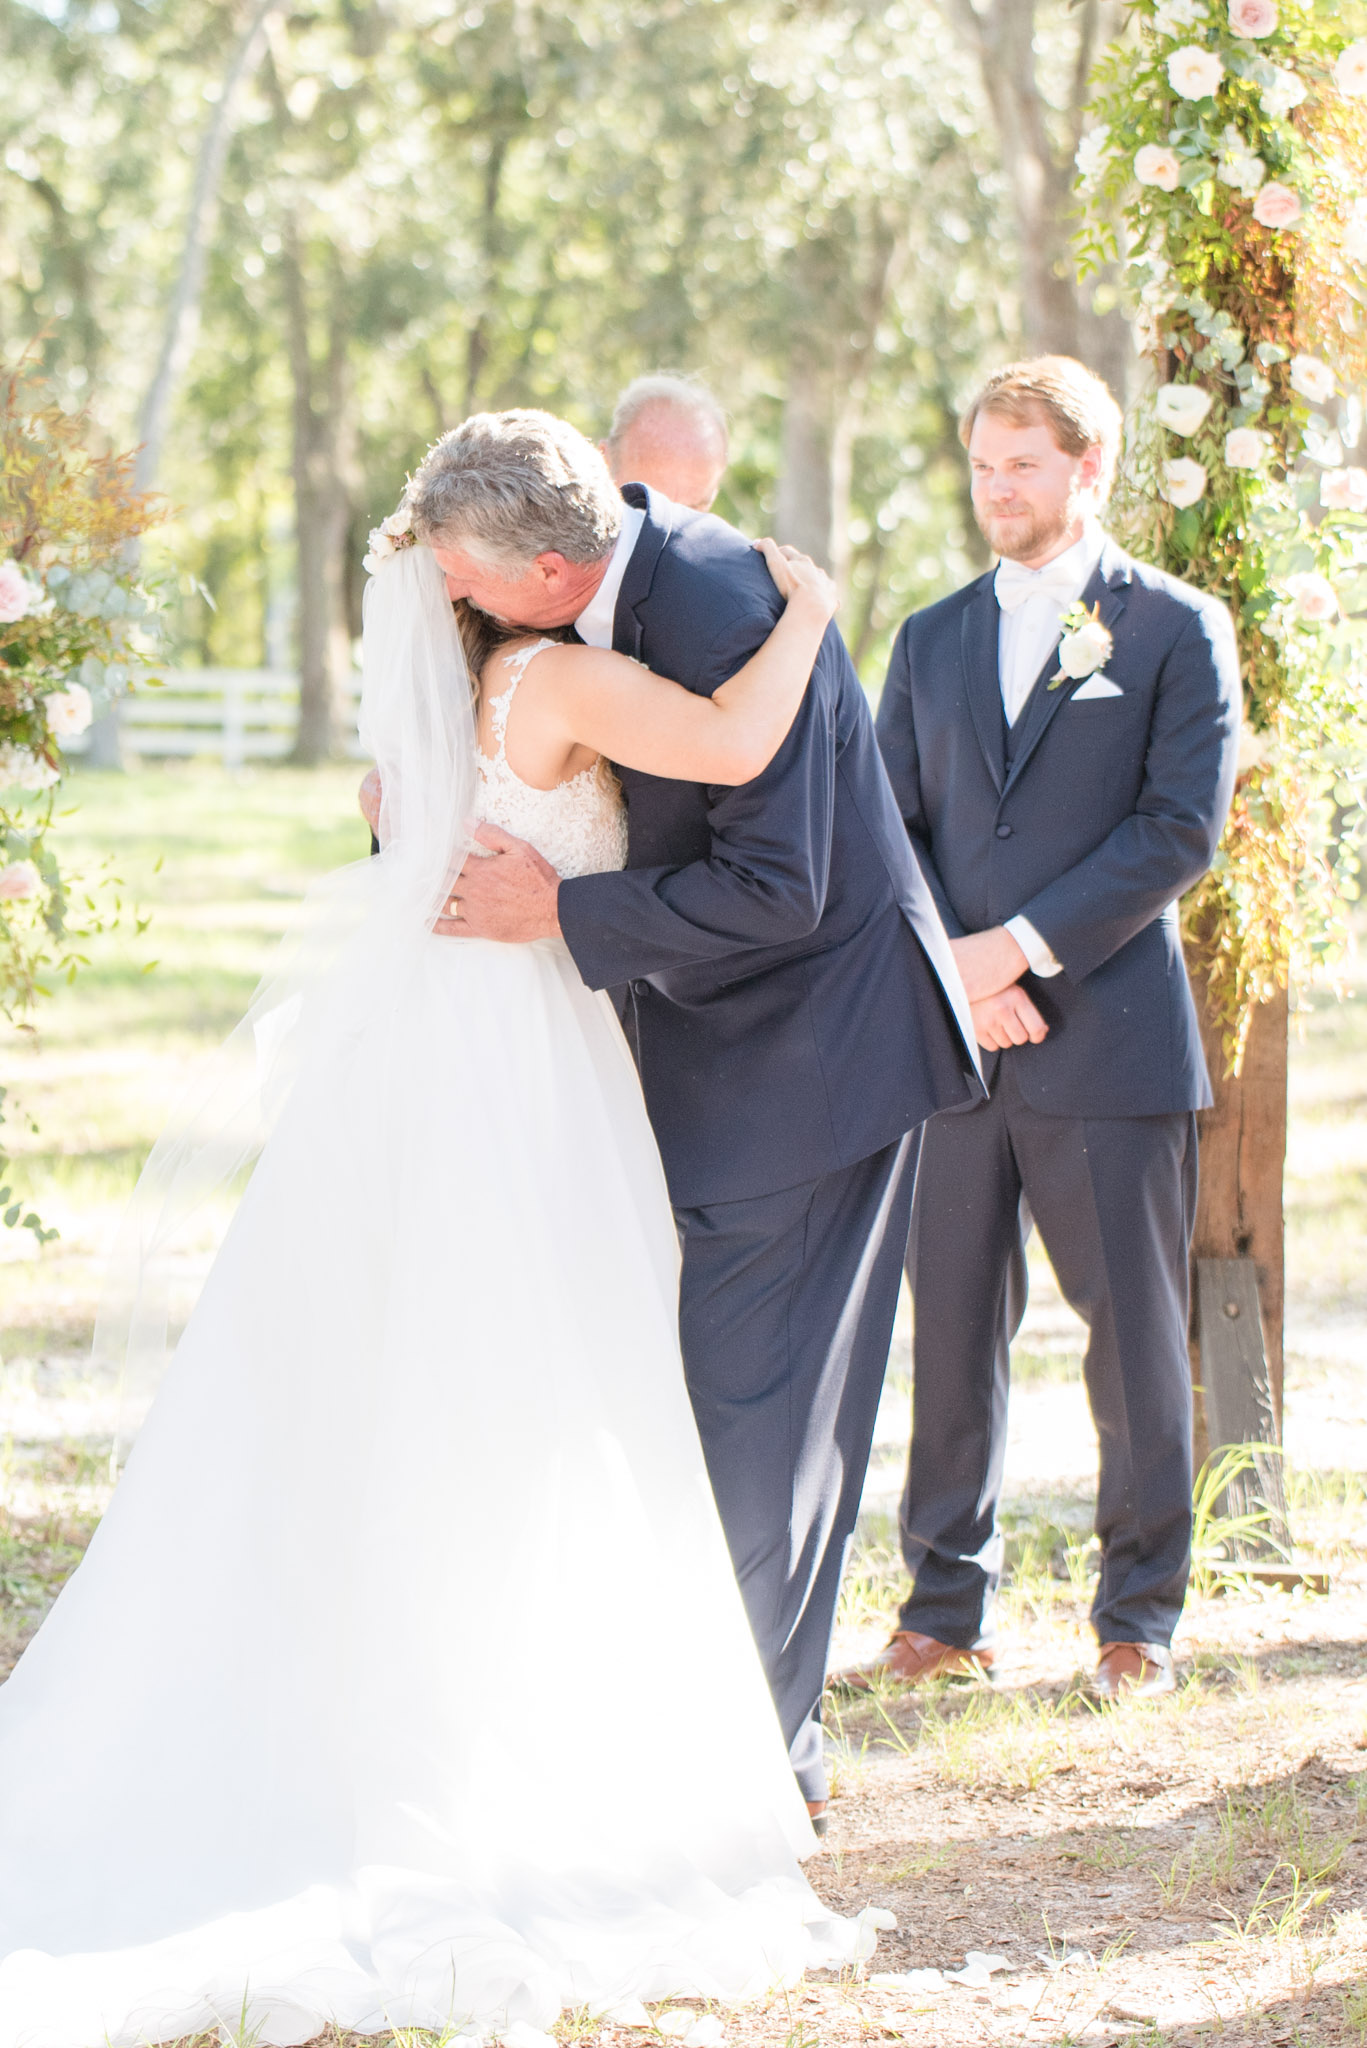 Bride and father hug during wedding ceremony.